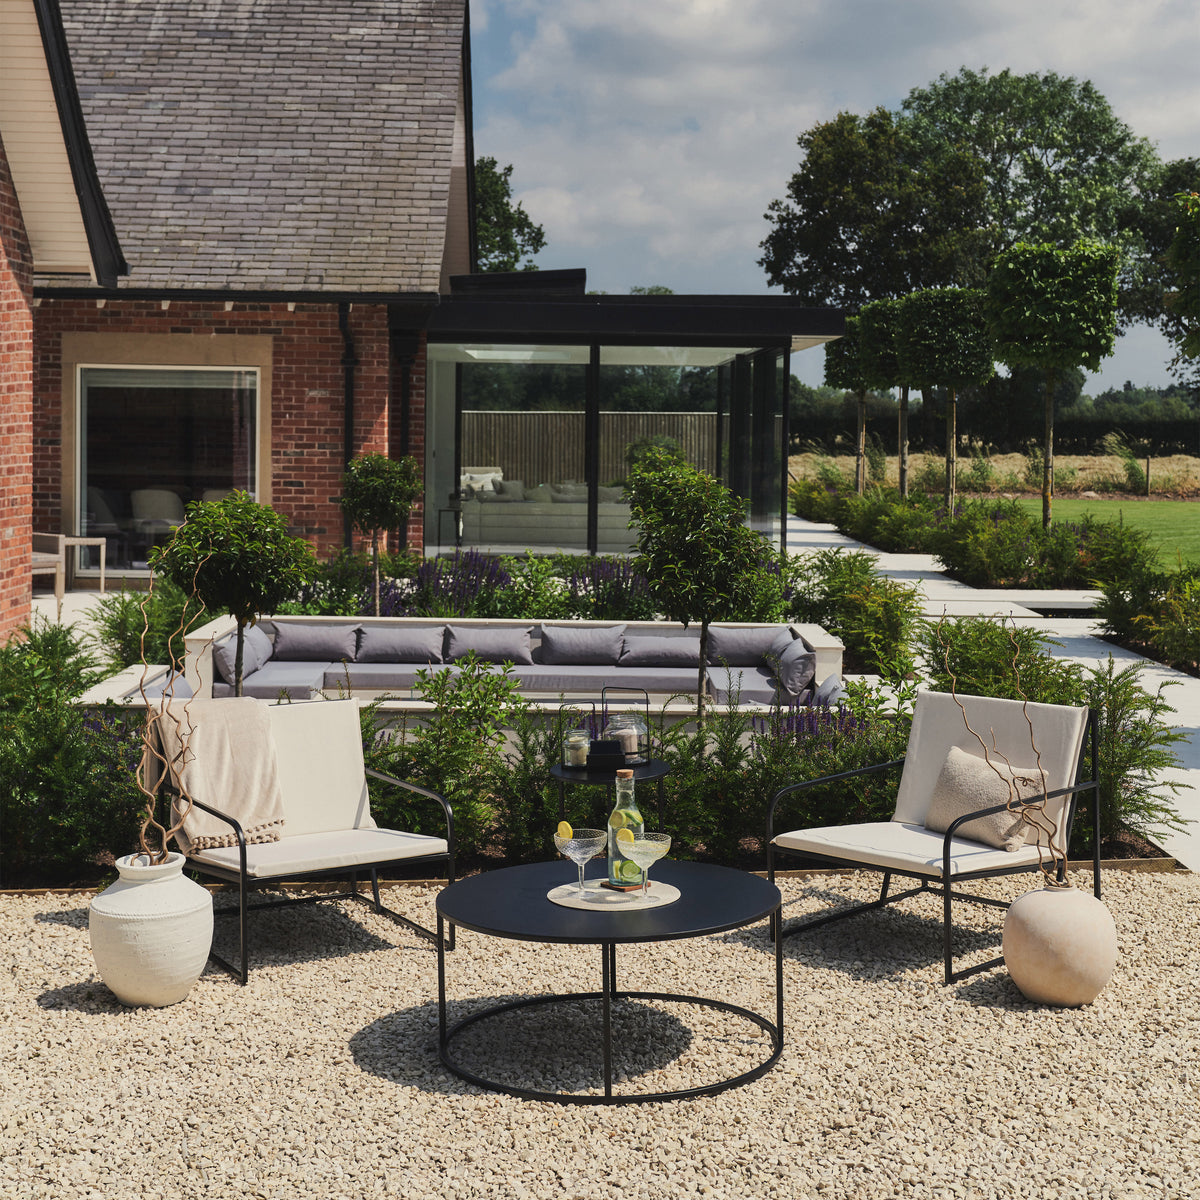 Our Sand Modern Rounded Garden Furniture Set in a typical setting